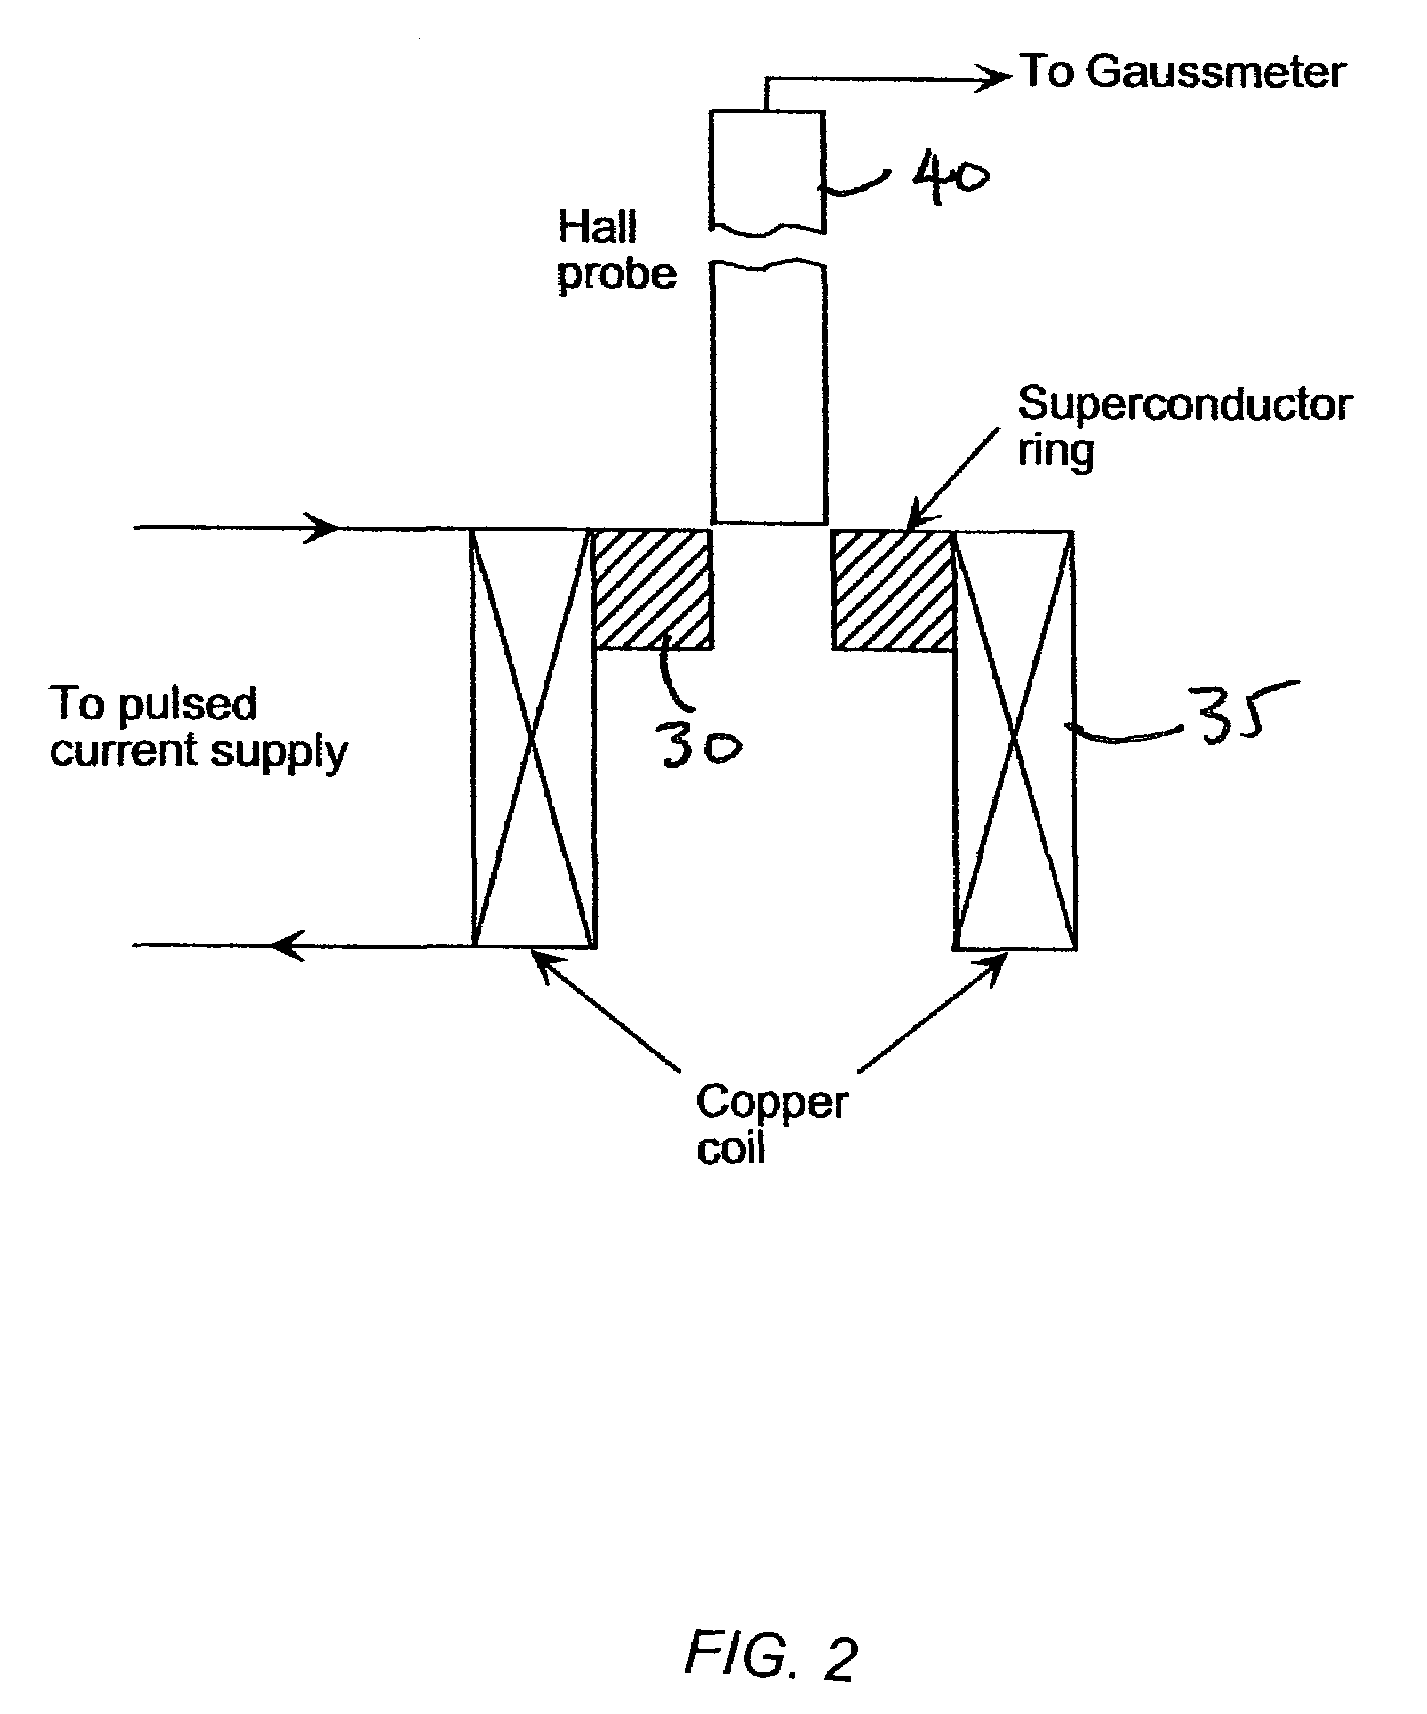 Superconducting magnetic control system for manipulation of particulate matter and magnetic probes in medical and industrial applications